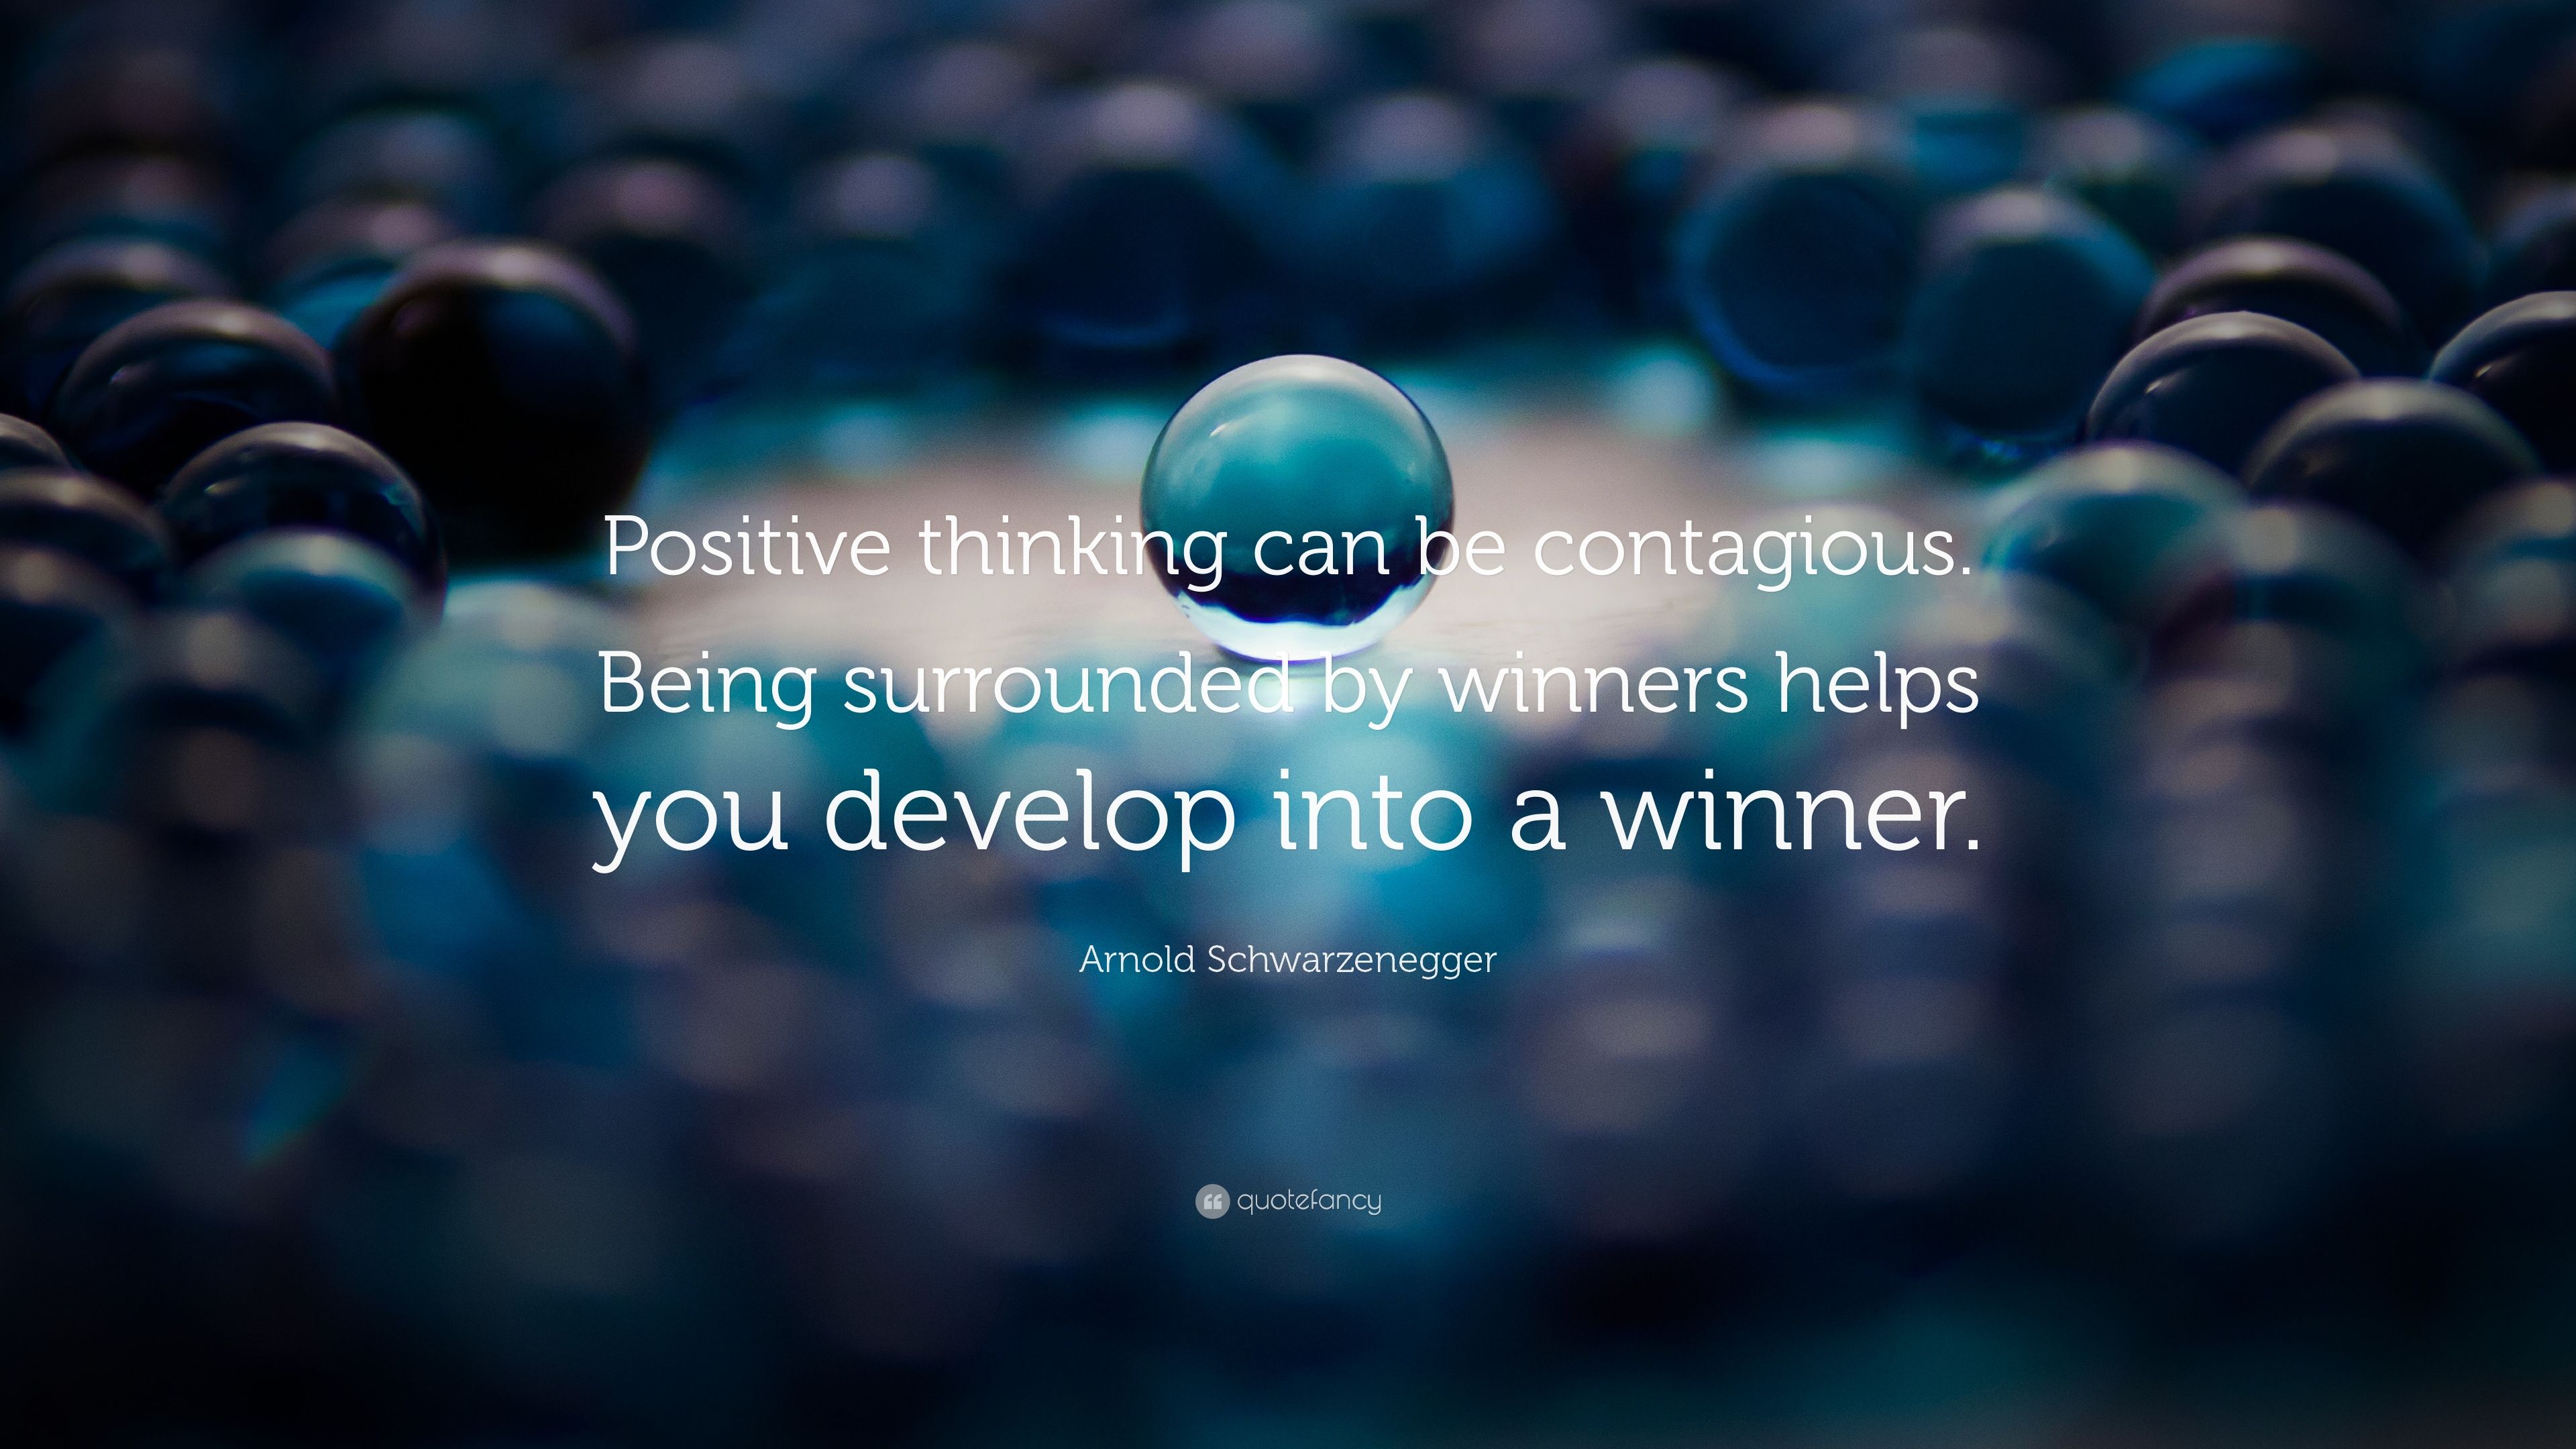 Arnold Schwarzenegger Quote Positive thinking can be contagious